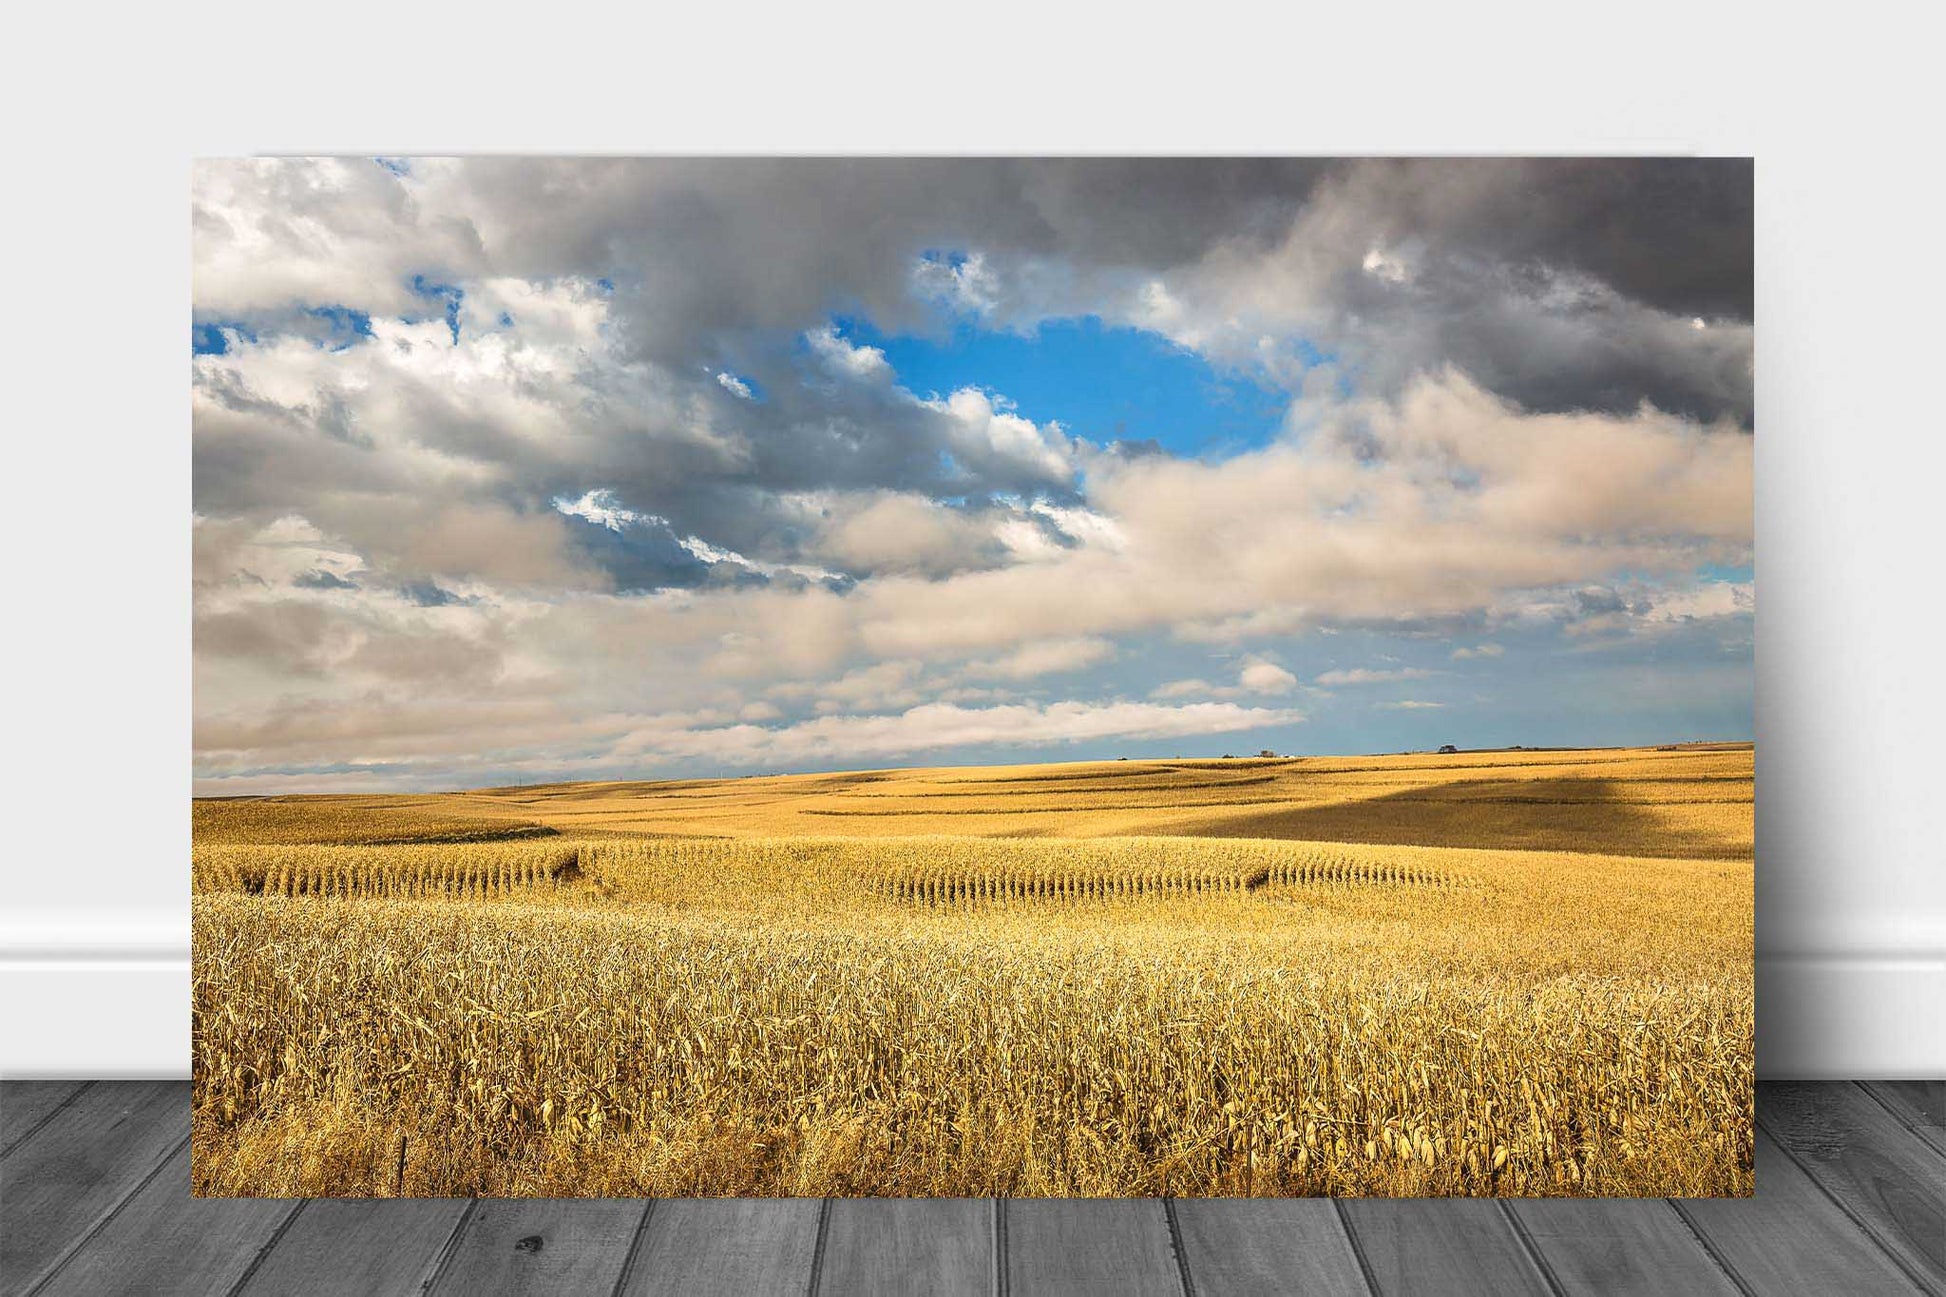 Midwestern aluminum metal print of golden terraced corn field under a fair sky on an autumn day in Iowa by Sean Ramsey of Southern Plains Photography.